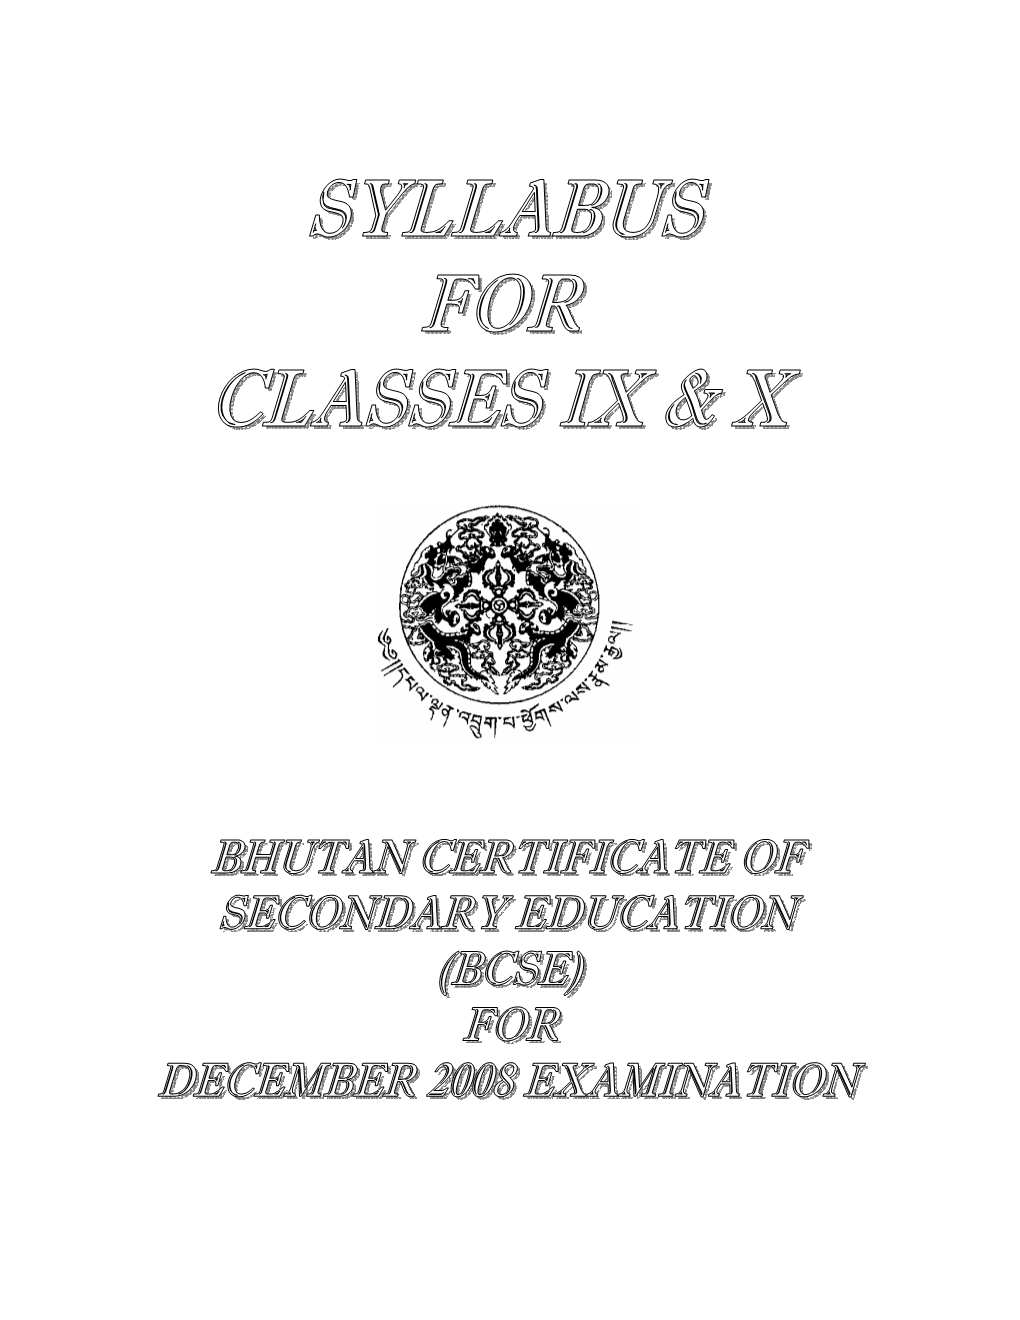 Syllabus for Classes 9 & 10